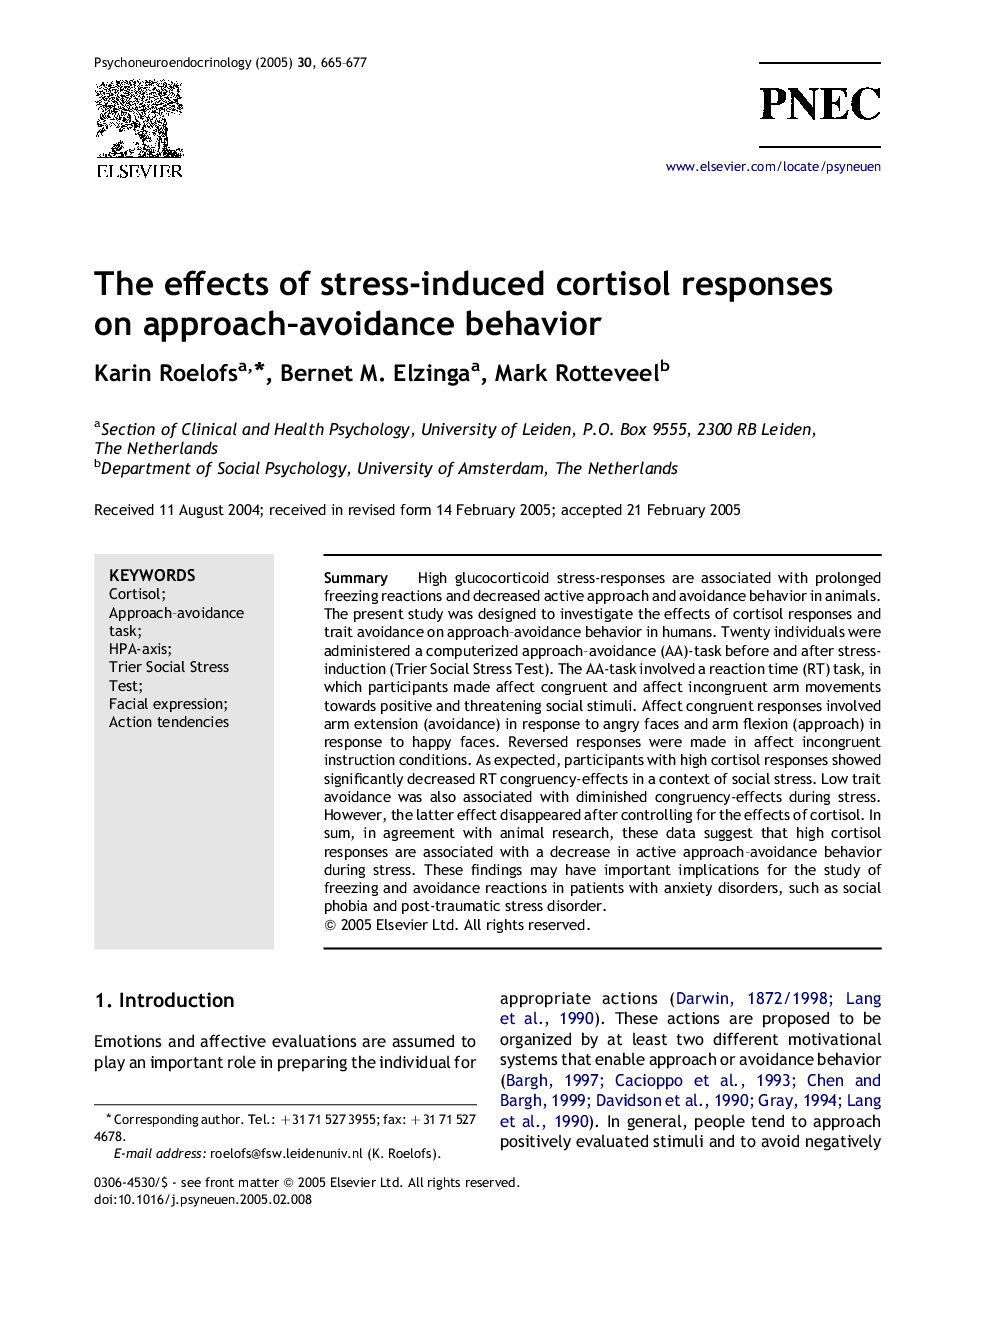 The effects of stress-induced cortisol responses on approach-avoidance behavior